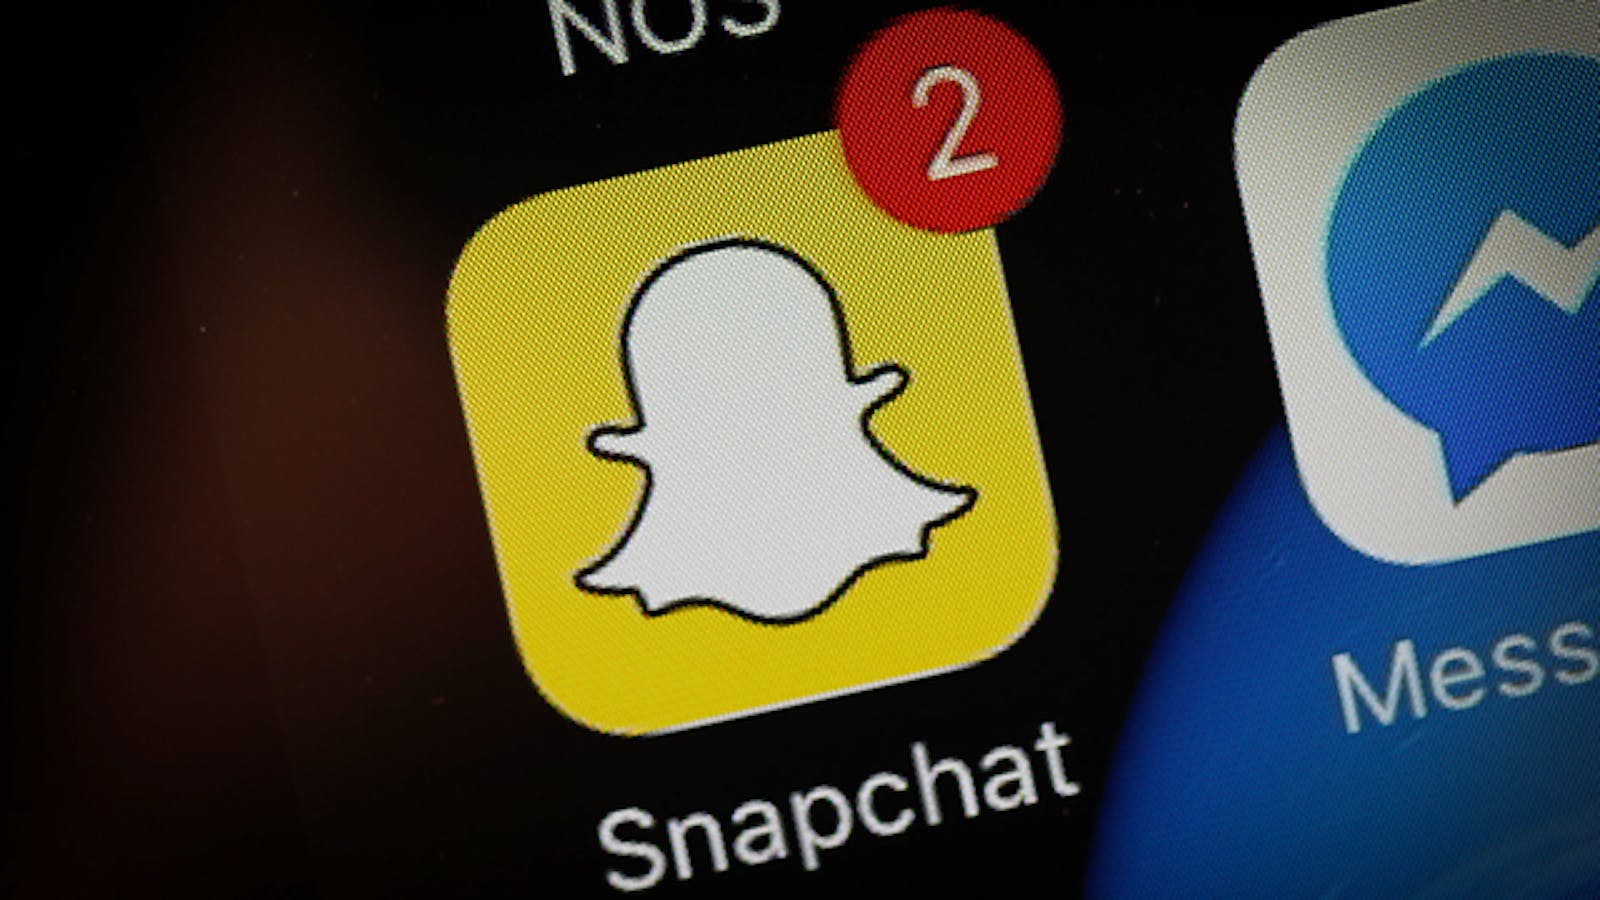 Snapchat app is seen on an iPhone. Photo by AP